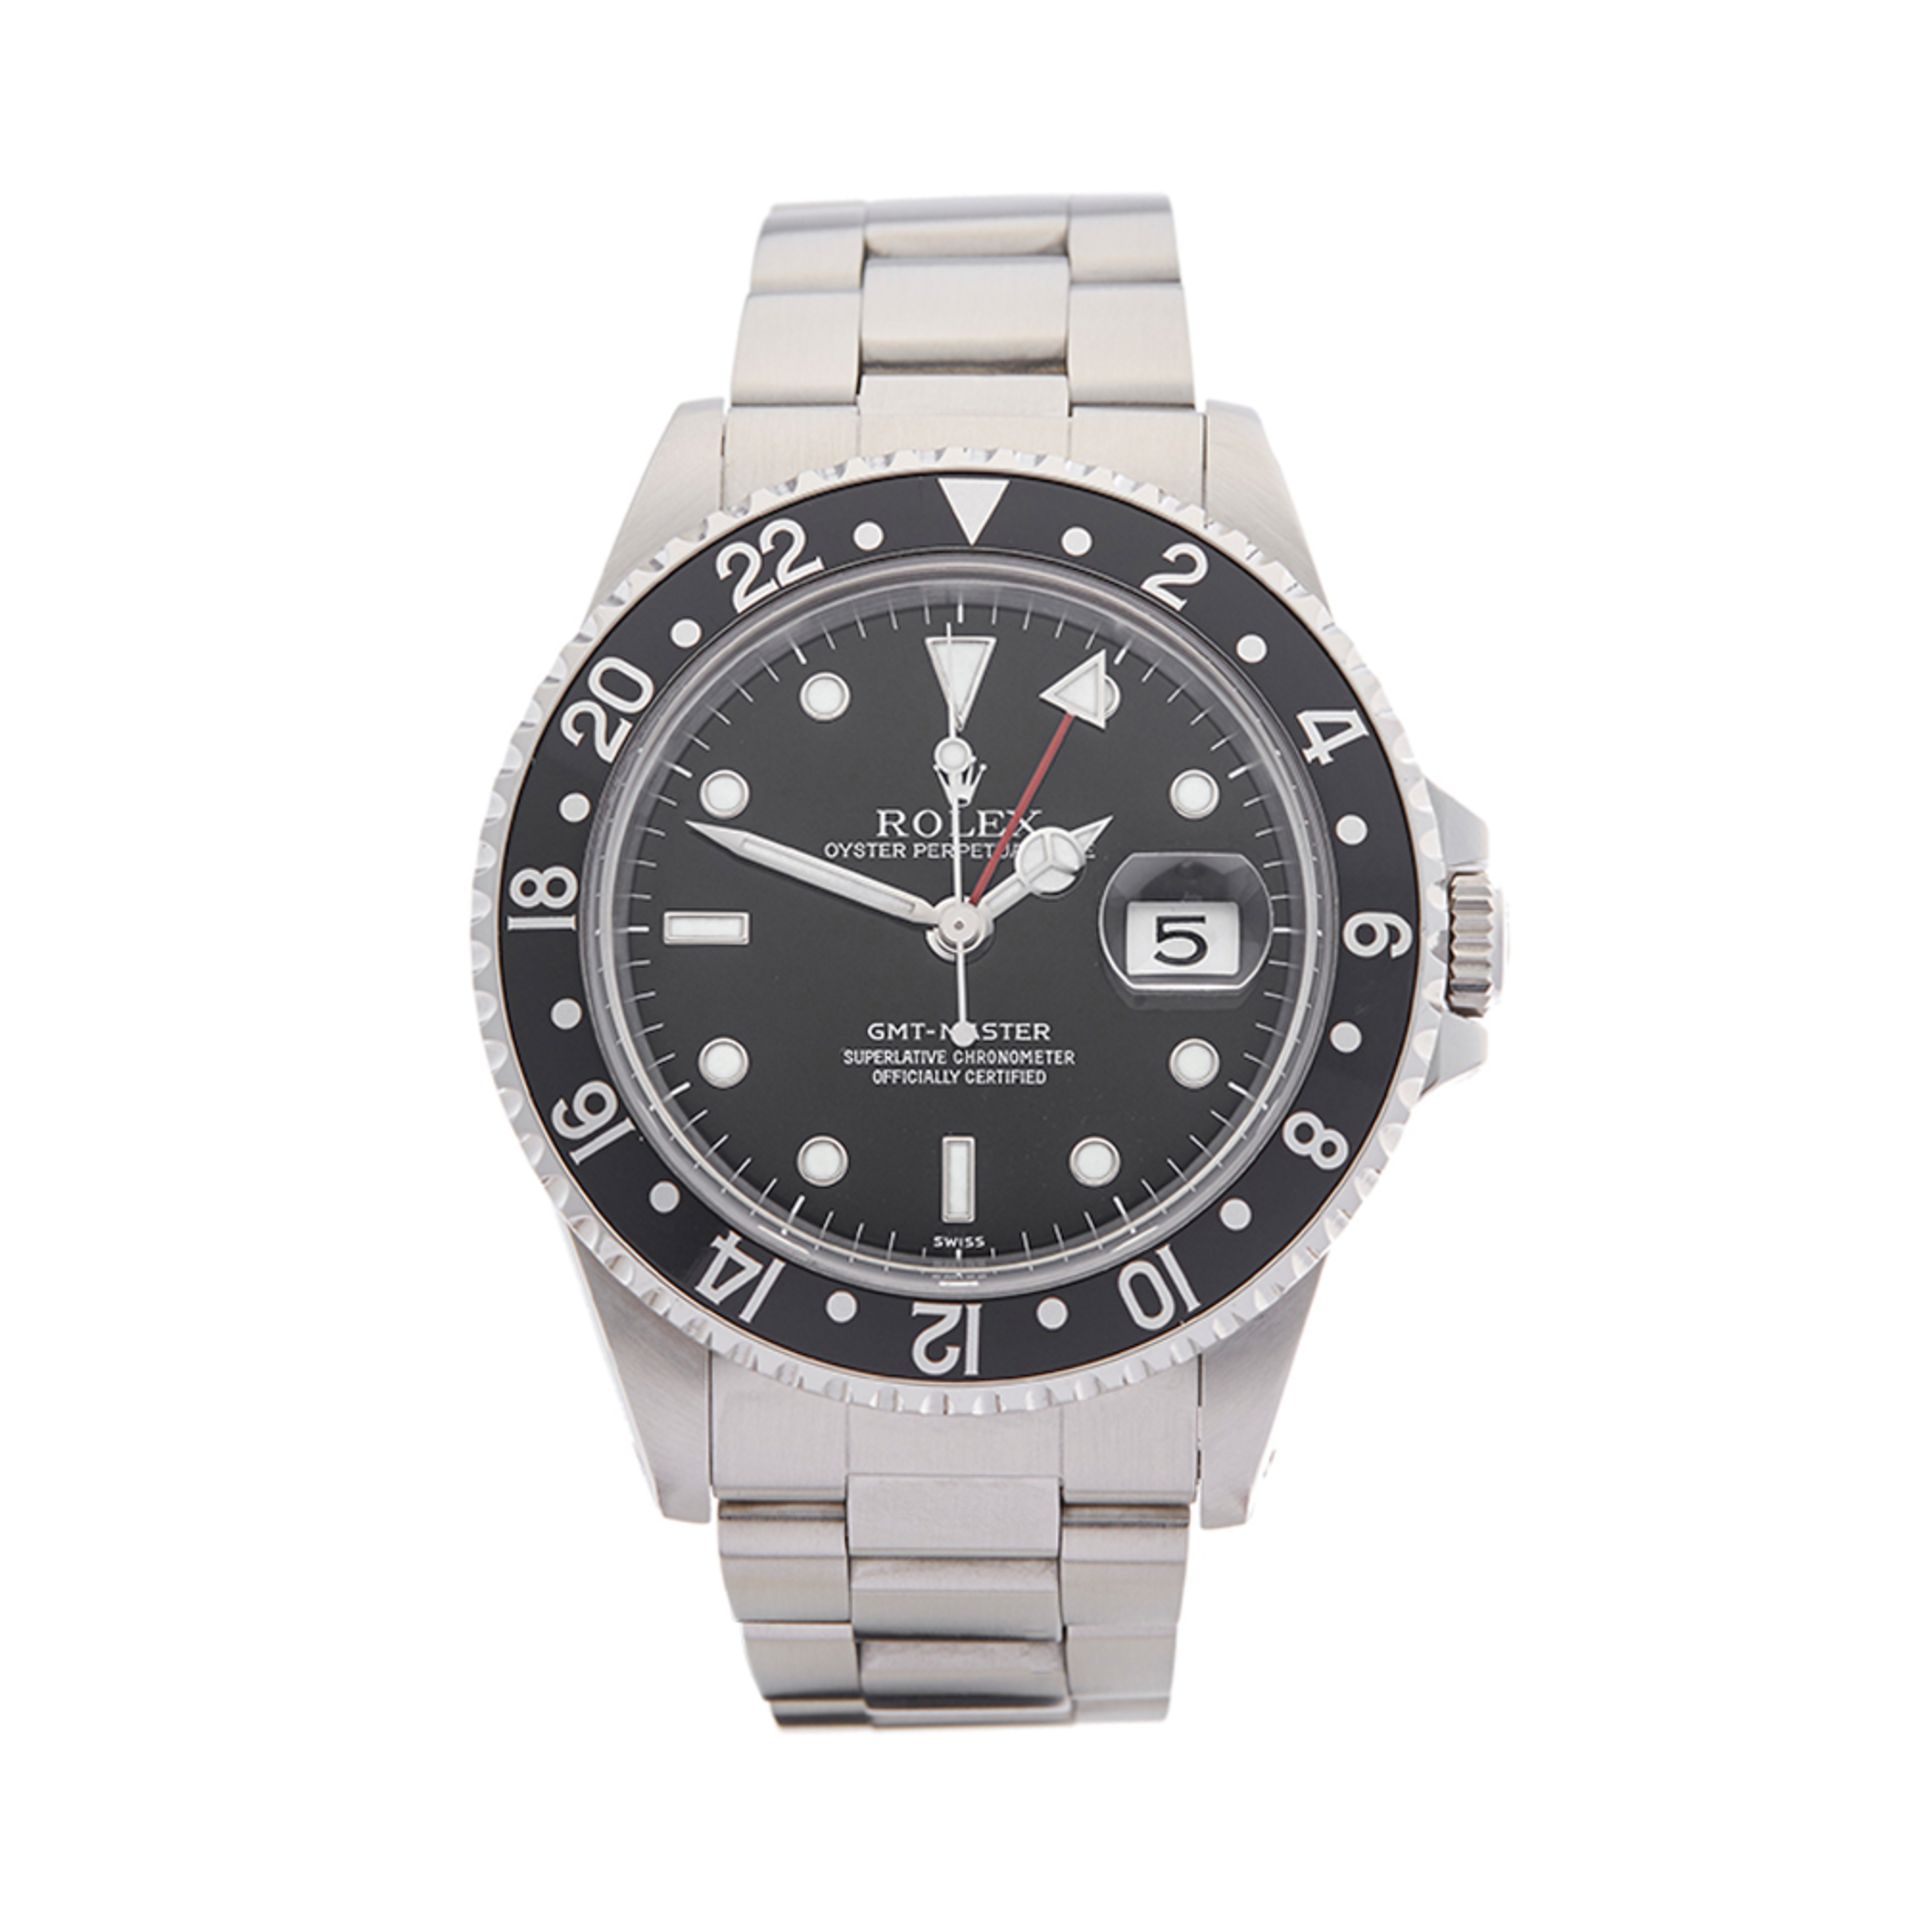 GMT-Master 40mm Stainless Steel - 16700 - Image 2 of 8